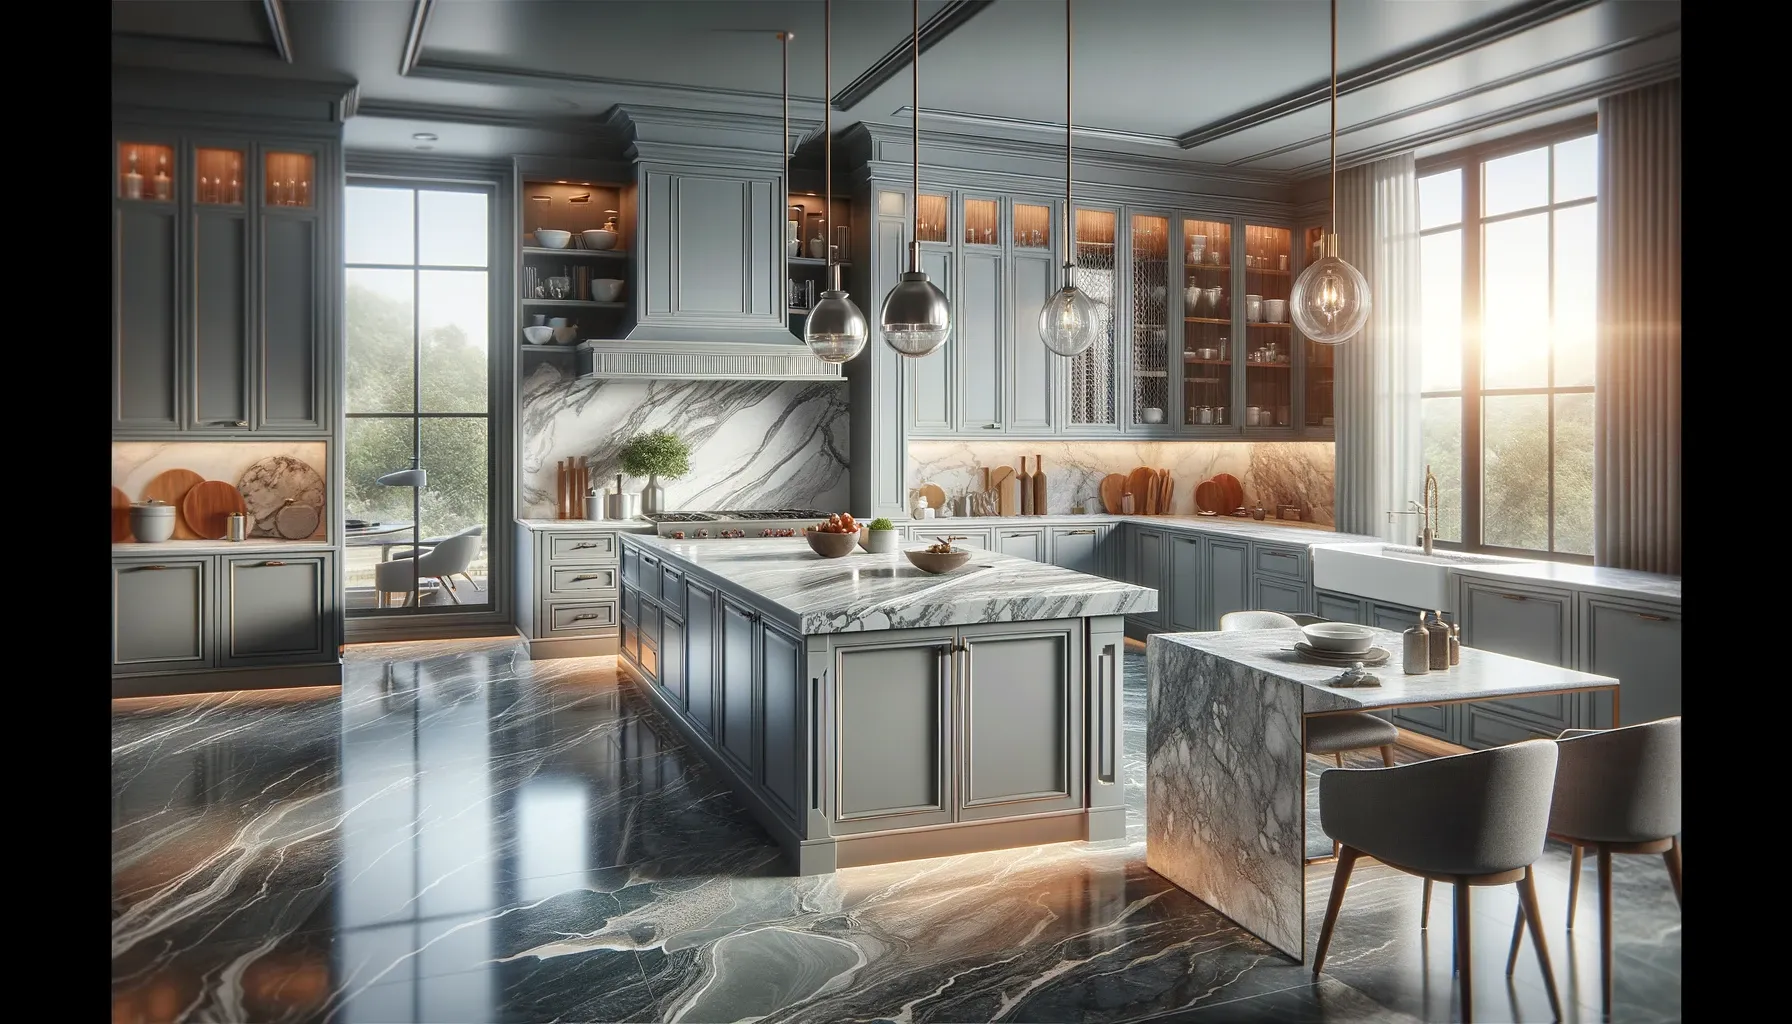 Even though all-gray kitchen cabinets are becoming less popular, a monochromatic look can still result in a unified and flexible kitchen layout.